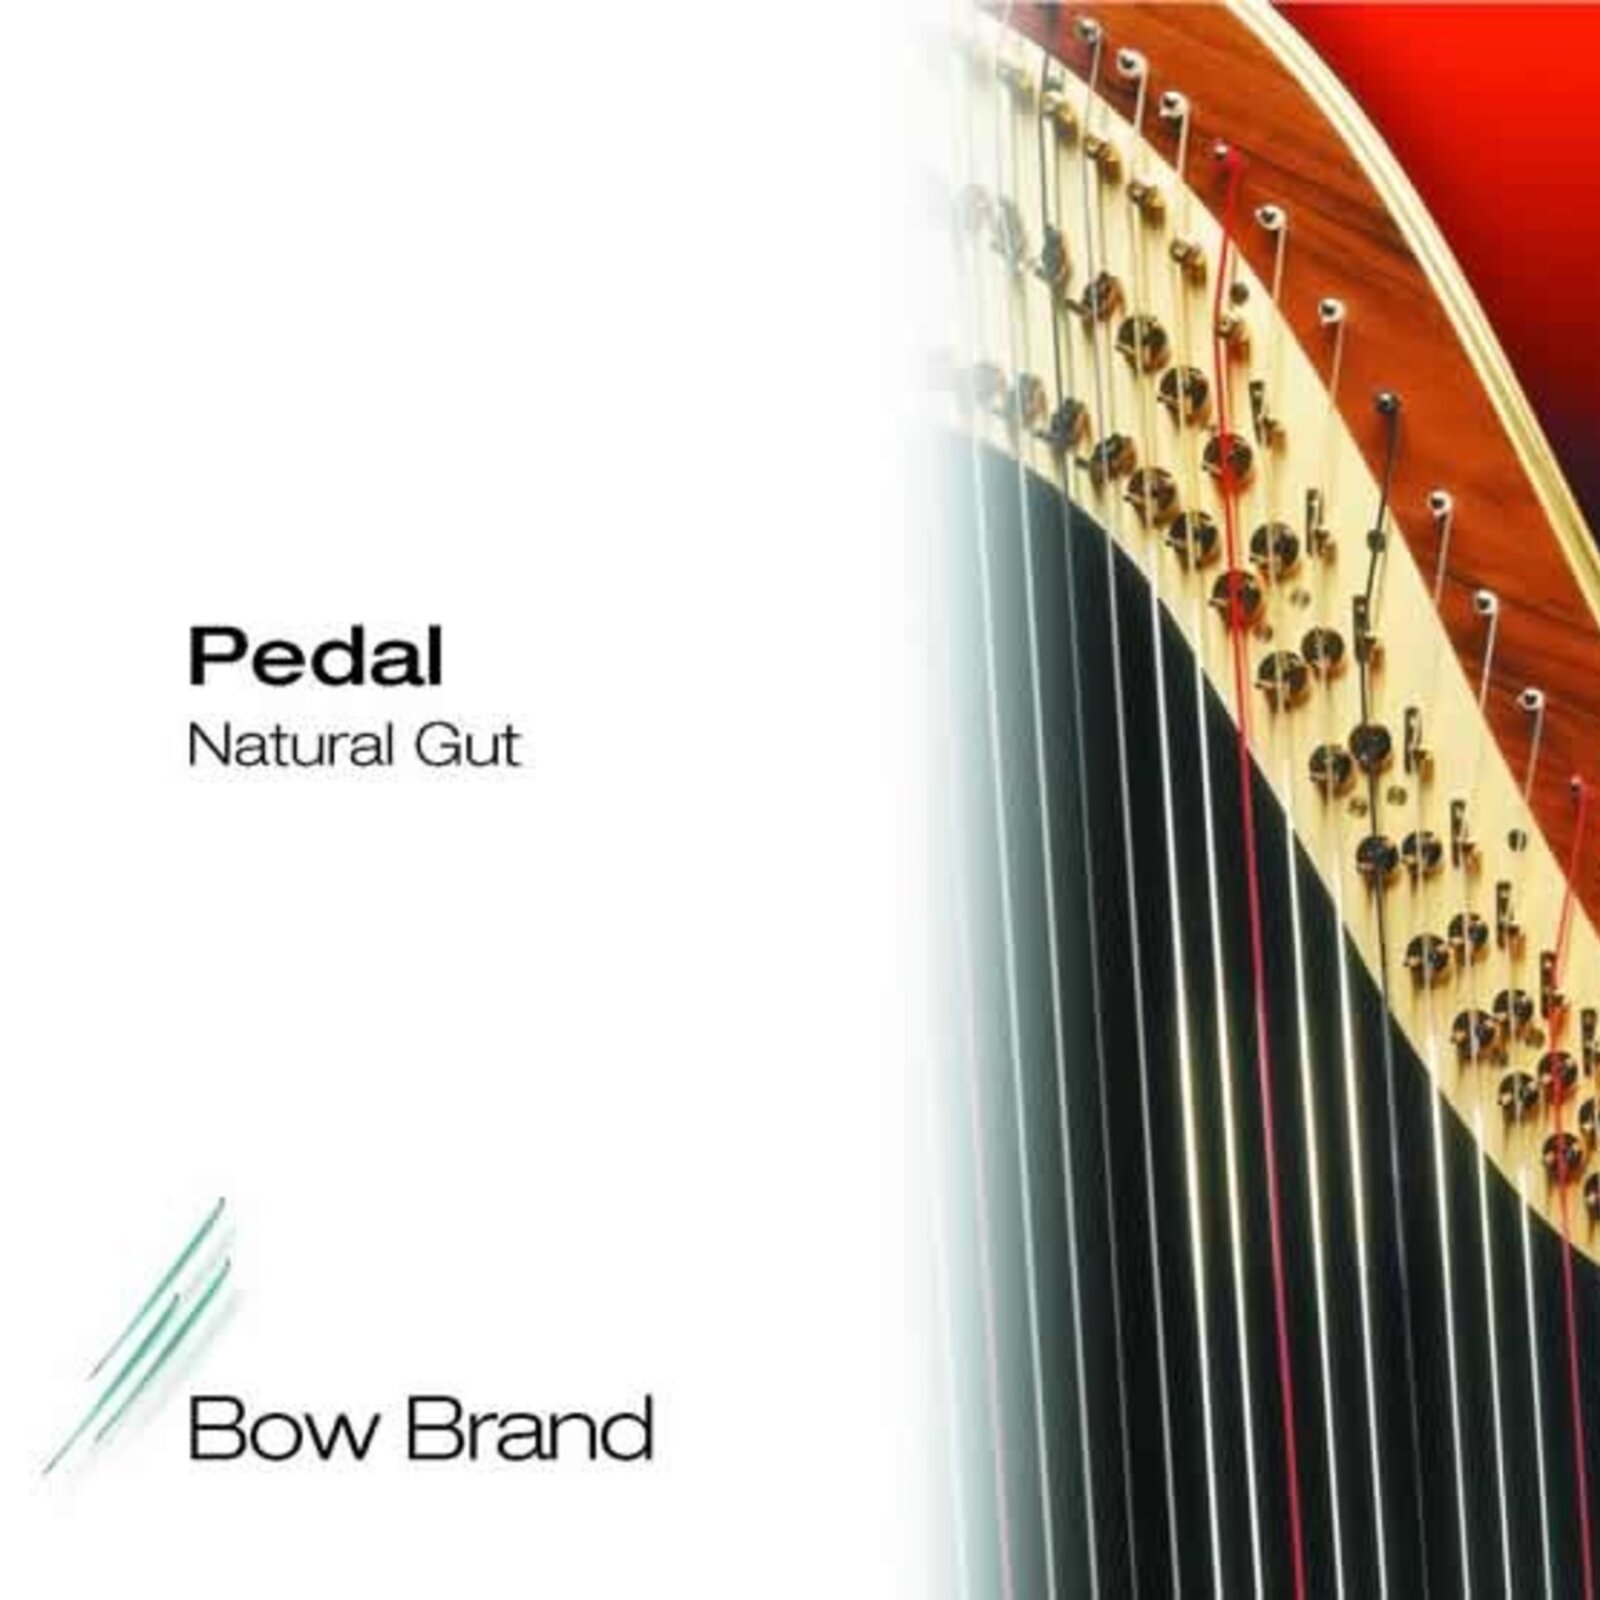 Bow Brand N 10 C 2nd octave in gut for pedal harp : photo 1